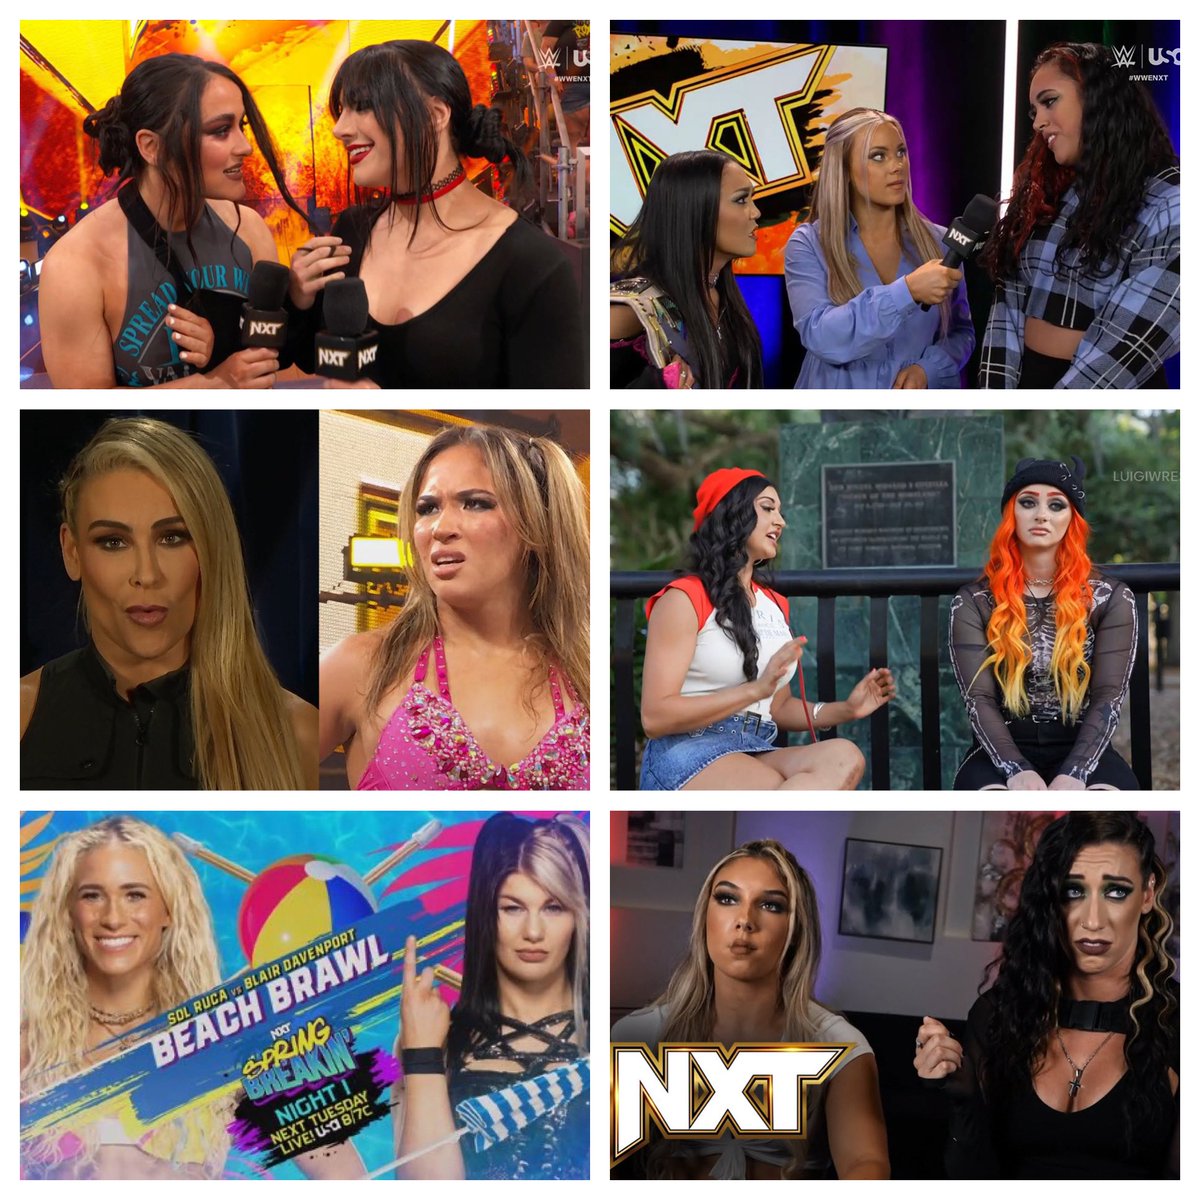 There’s currently 6 ongoing women’s feuds/storylines in NXT. NXT cooks with utilizing women